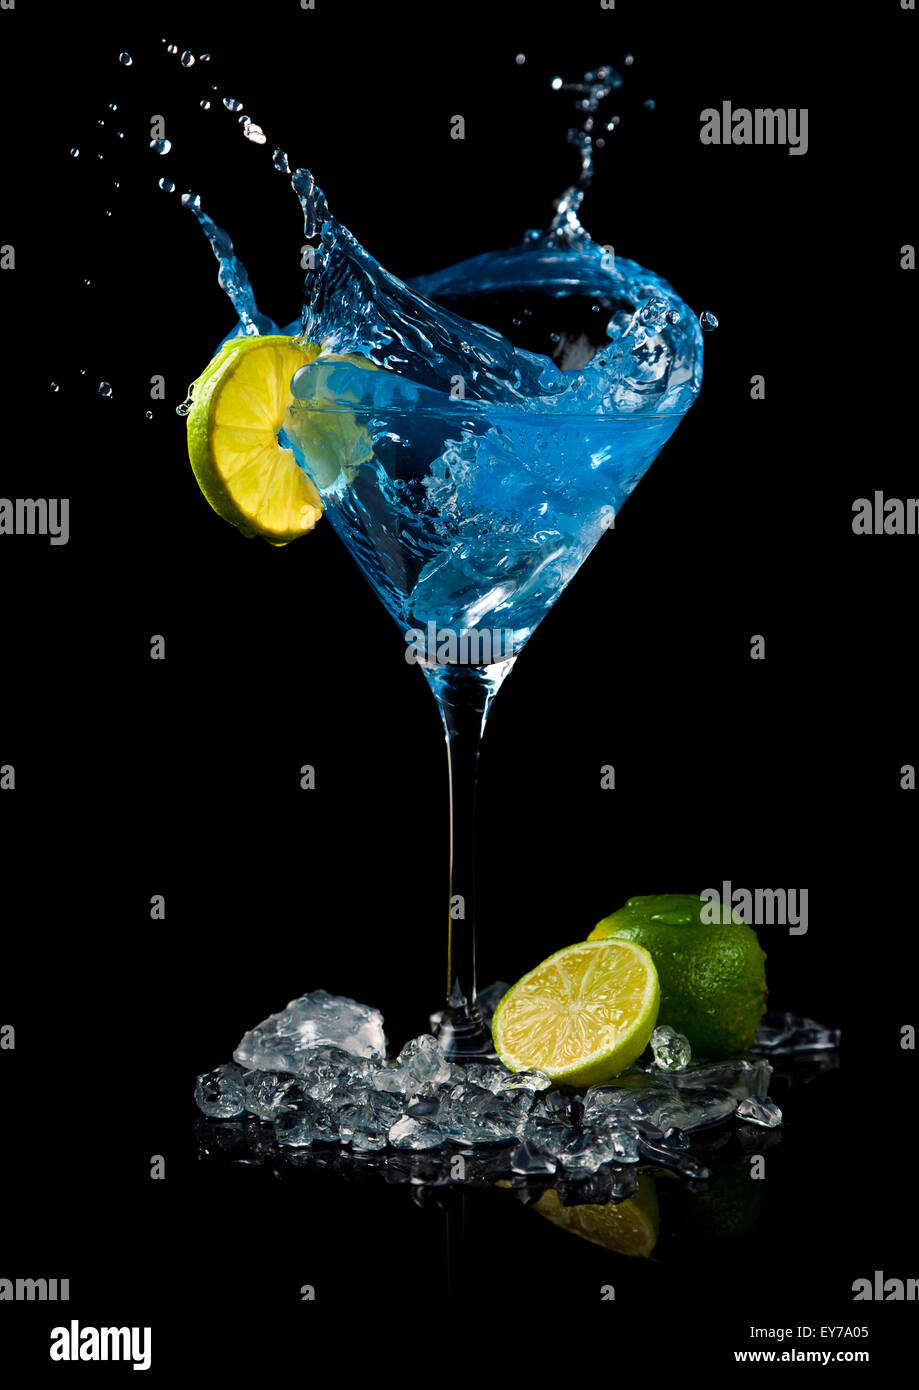 Ice cube making a splash in martini glass with blue cocktail, garnished with lime slice, lime, crushed ice. Black background. Stock Photo